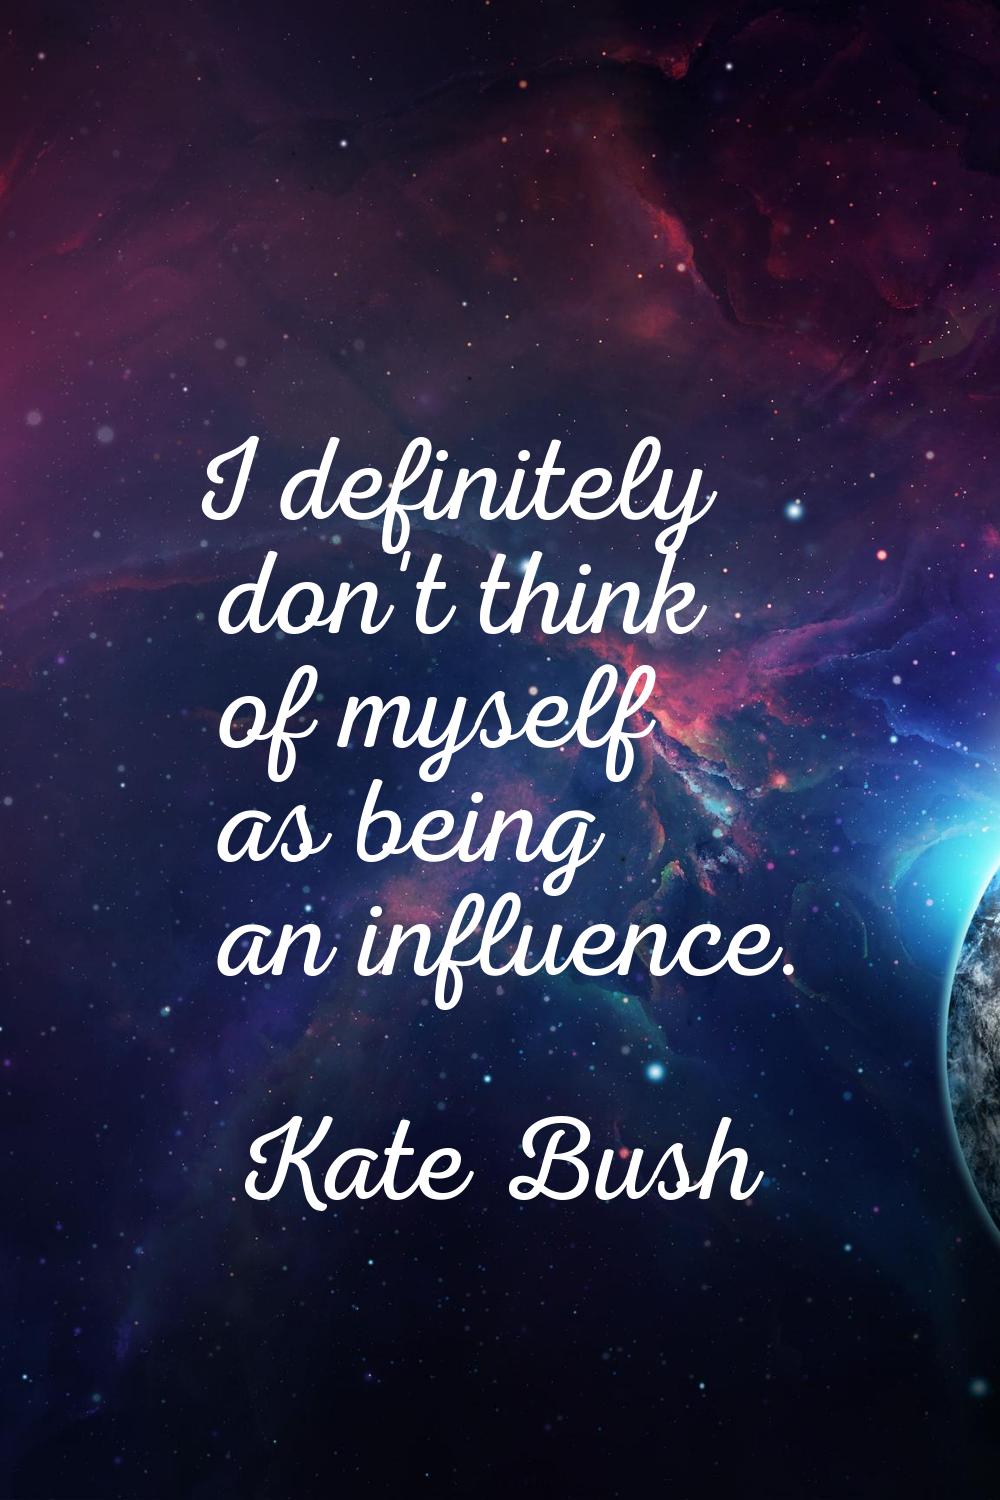 I definitely don't think of myself as being an influence.